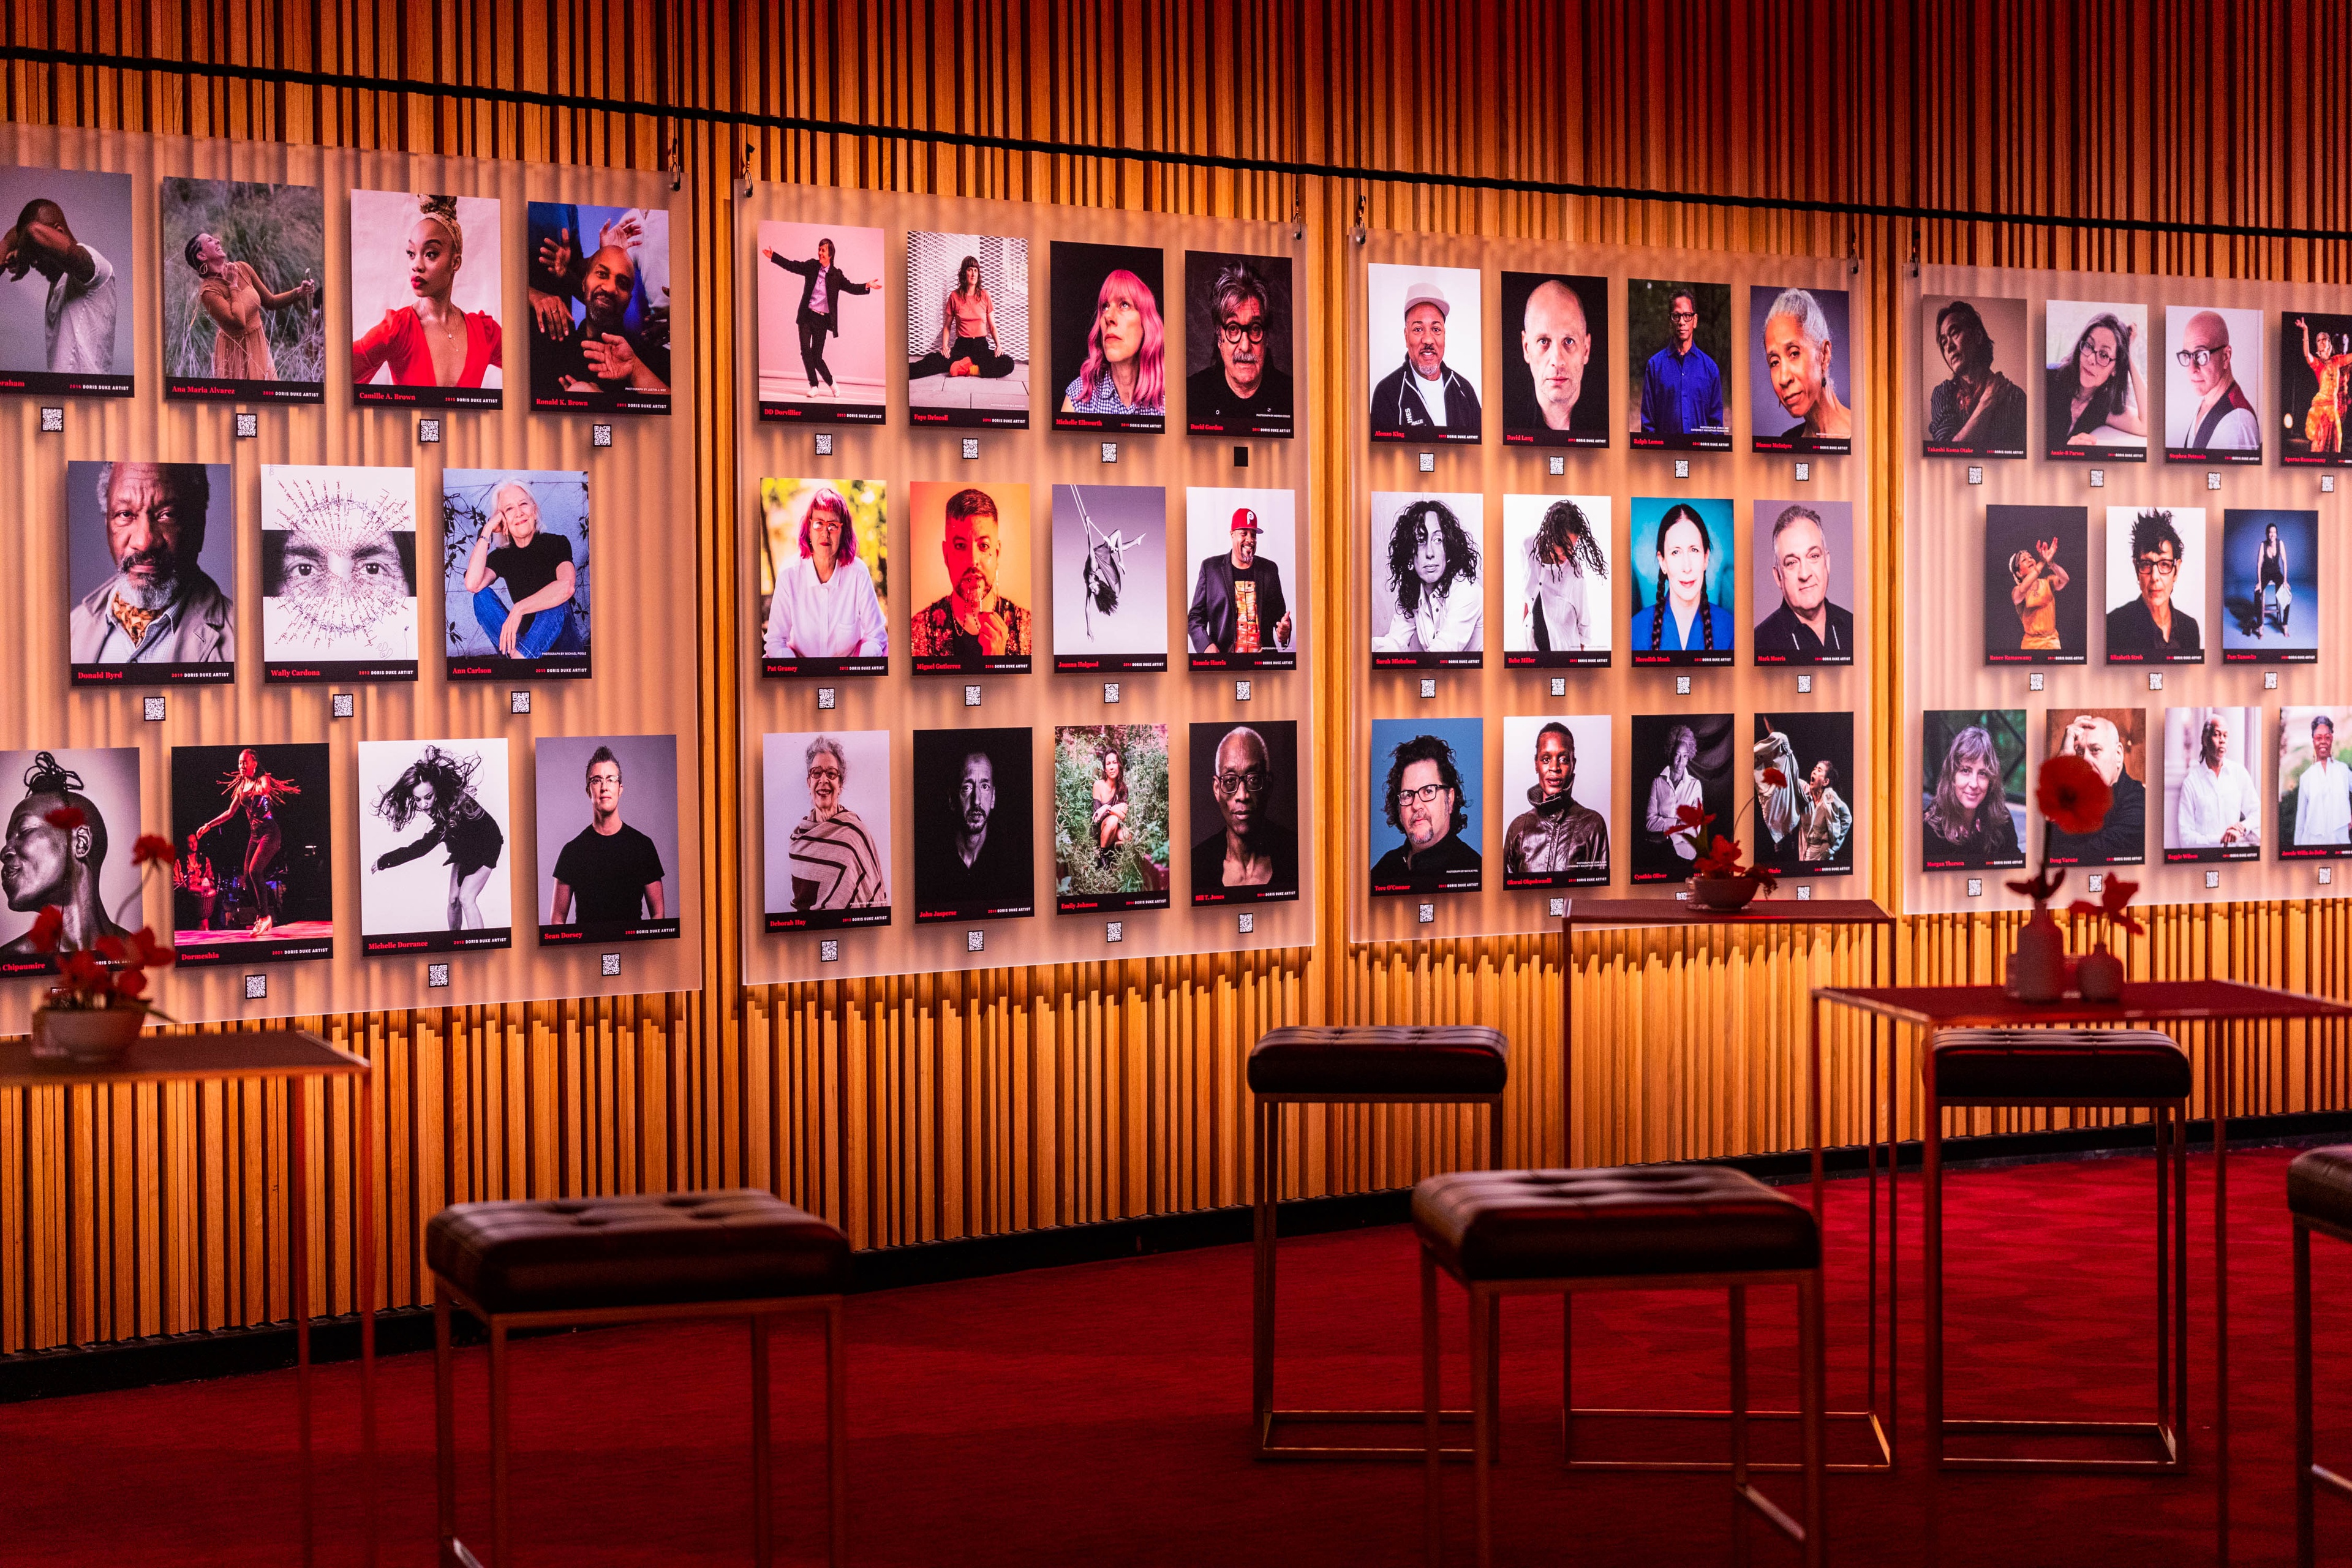 Doris Duke Artist Awards 10th Anniversary Celebration wooden wall featuring a photographic profiles grid of performers in contemporary dance, jazz, and theater